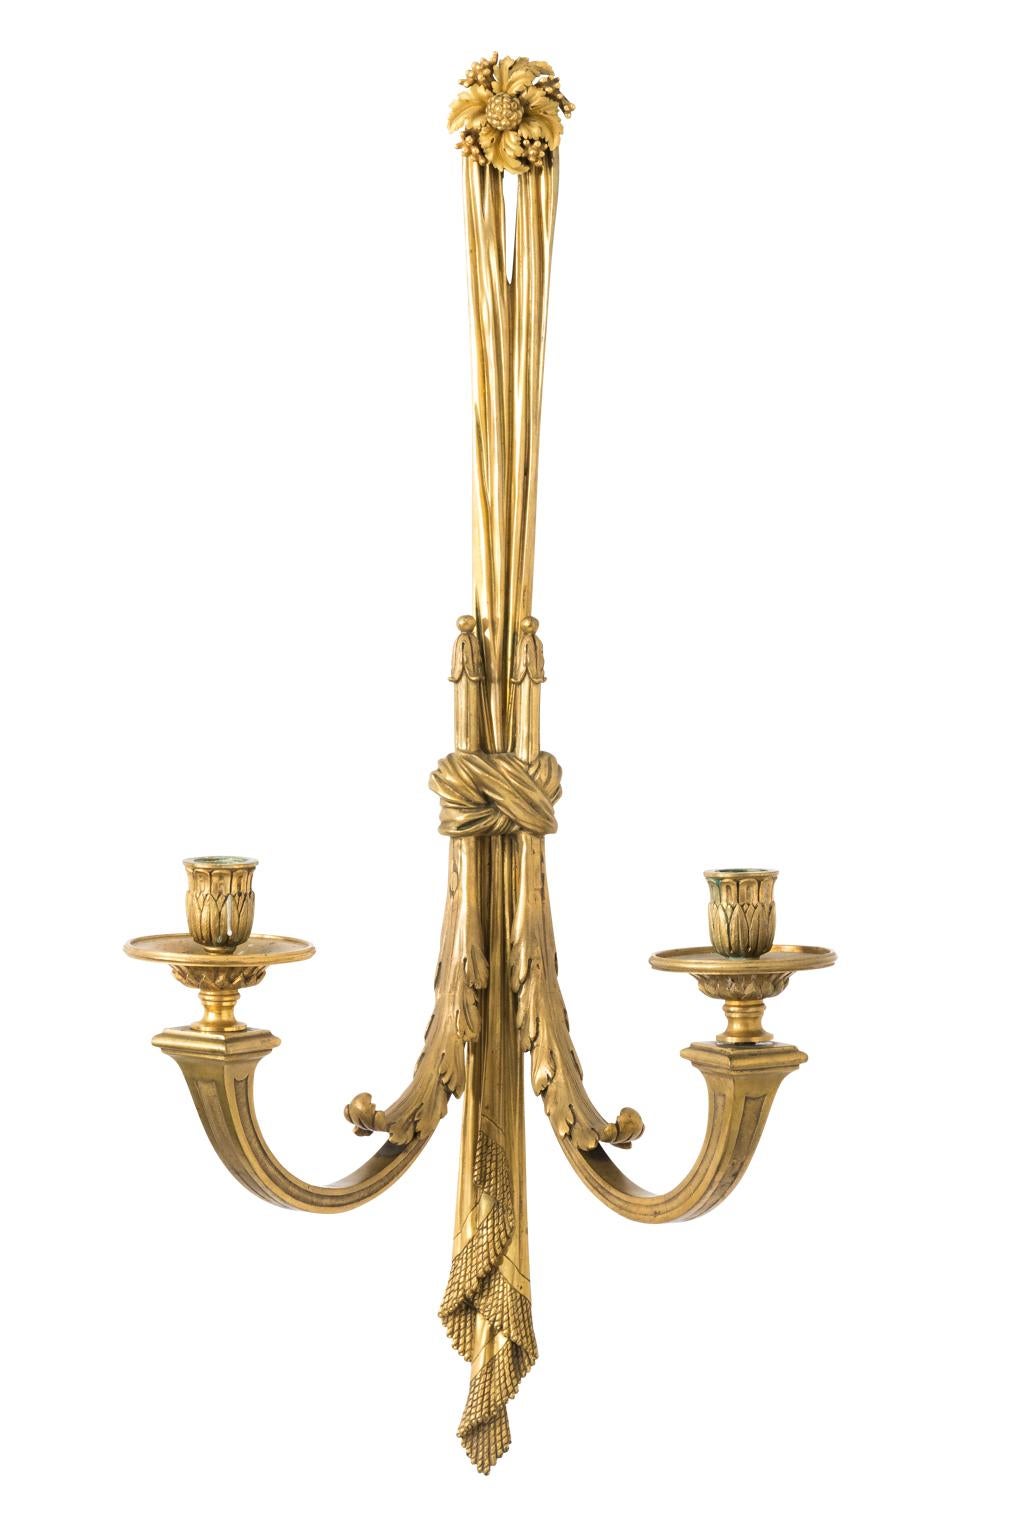 Pair of Louis XV Gilt Bronze Wall Candelabra For Sale 9